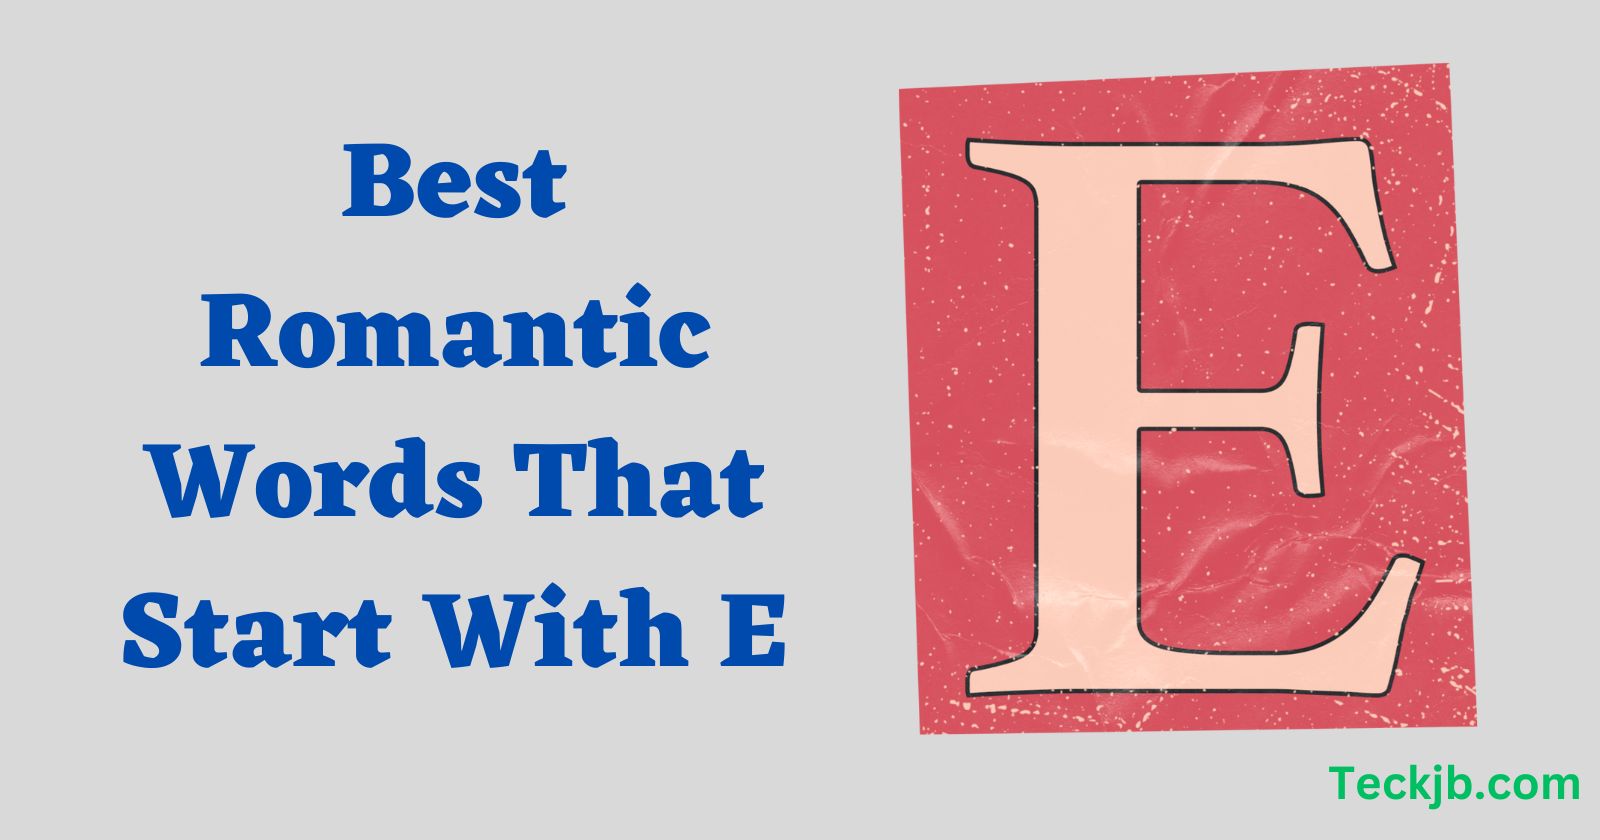 Best Romantic Words That Start With E